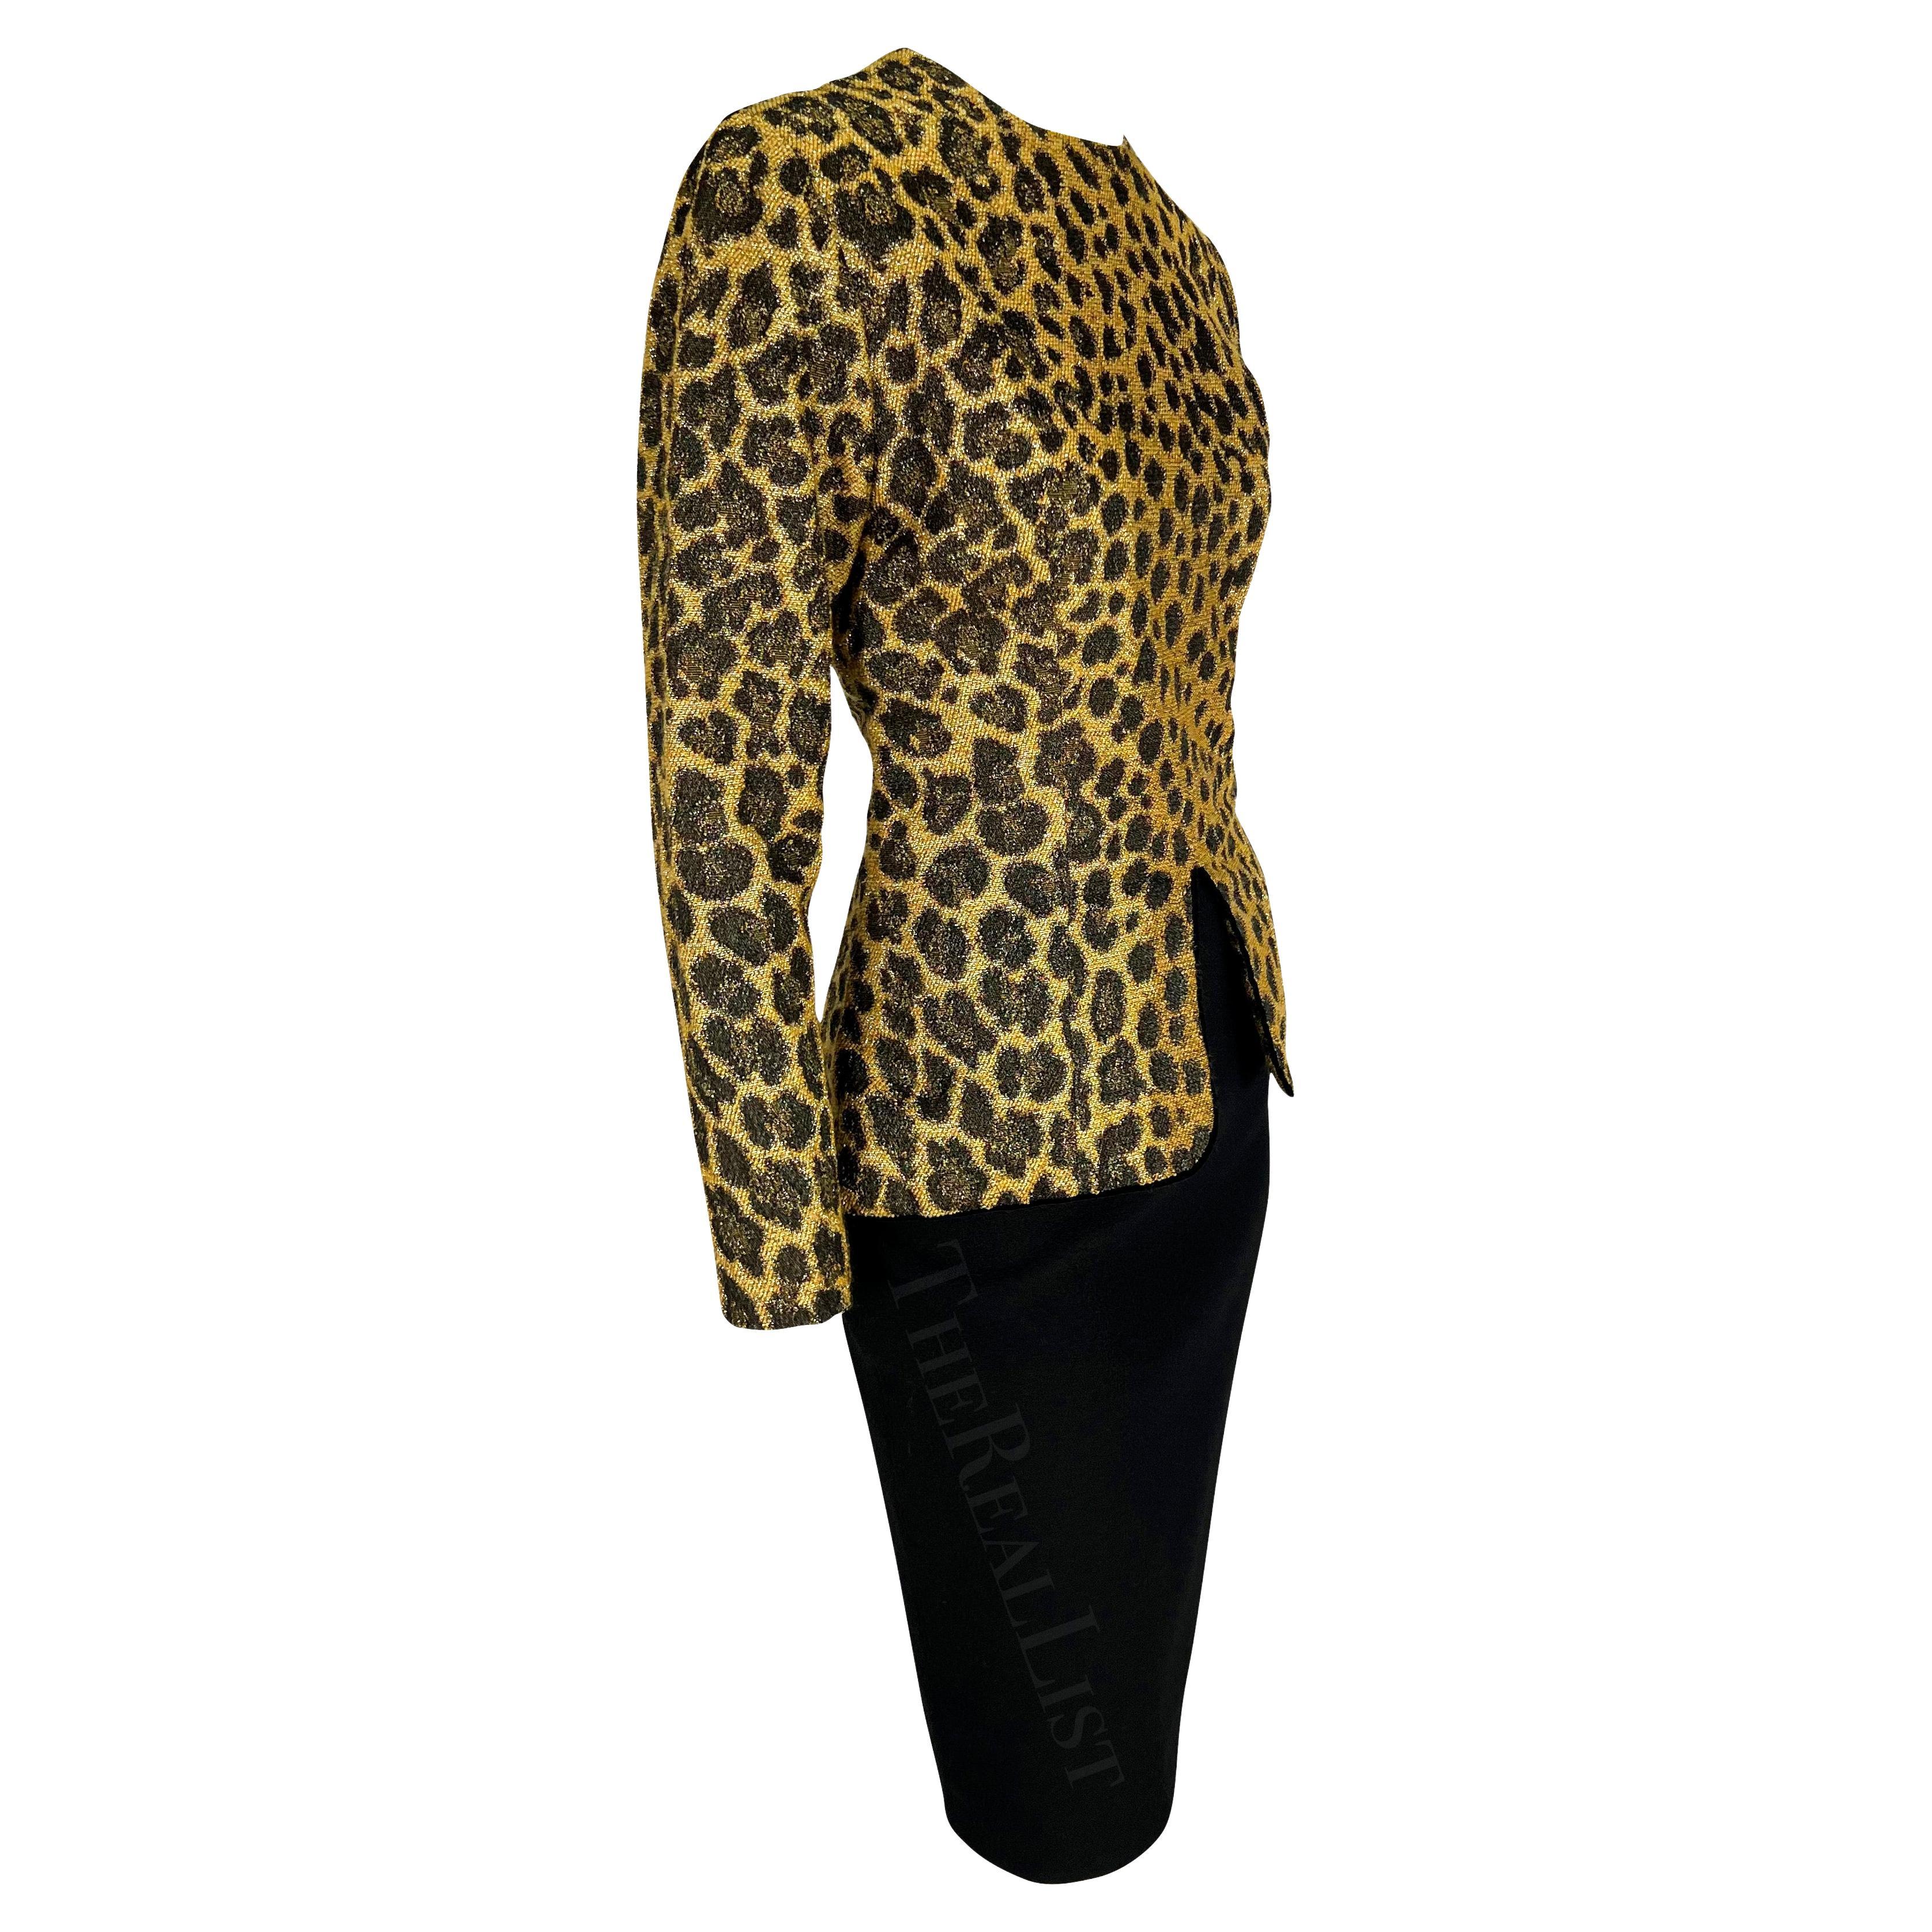 Early 1990s Christian Dior by Gianfranco Ferre Cheetah Print Embroidered Dress For Sale 4